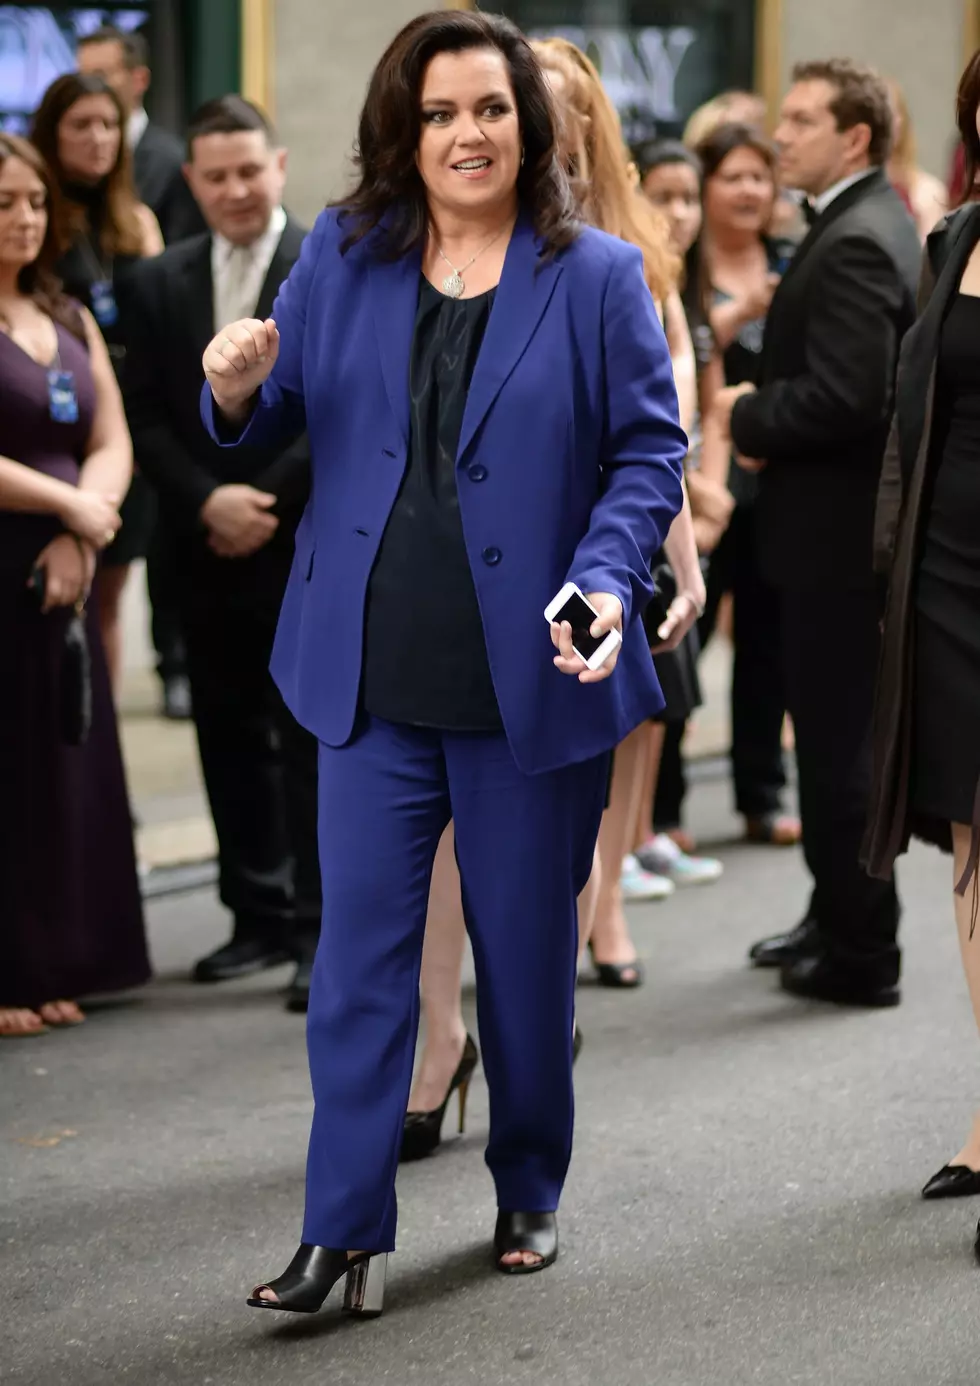 Rosie O’Donnell Is Returning To The View [VIDEO]